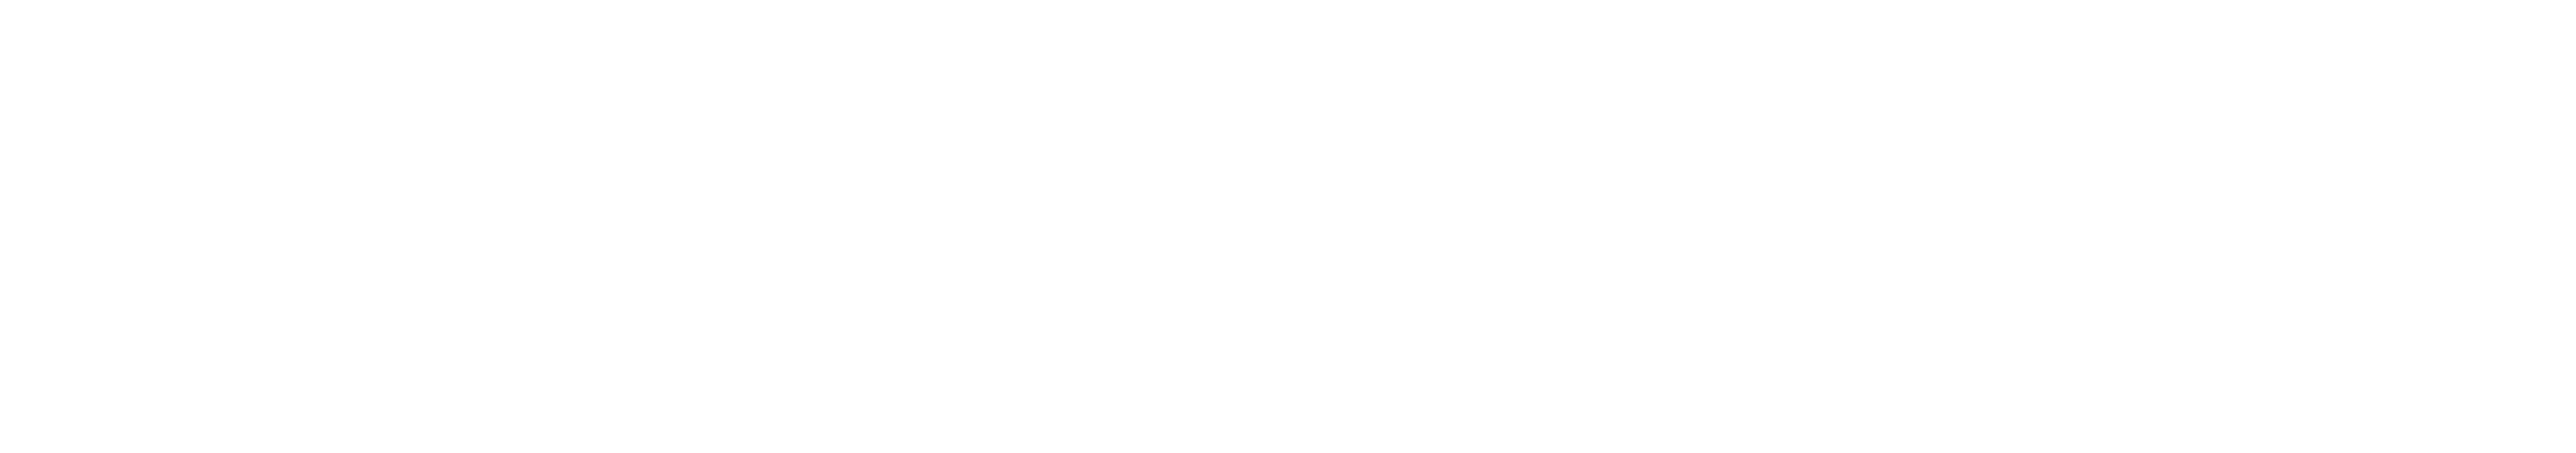 Soil Plant Atmosphere Research | Mississippi State University